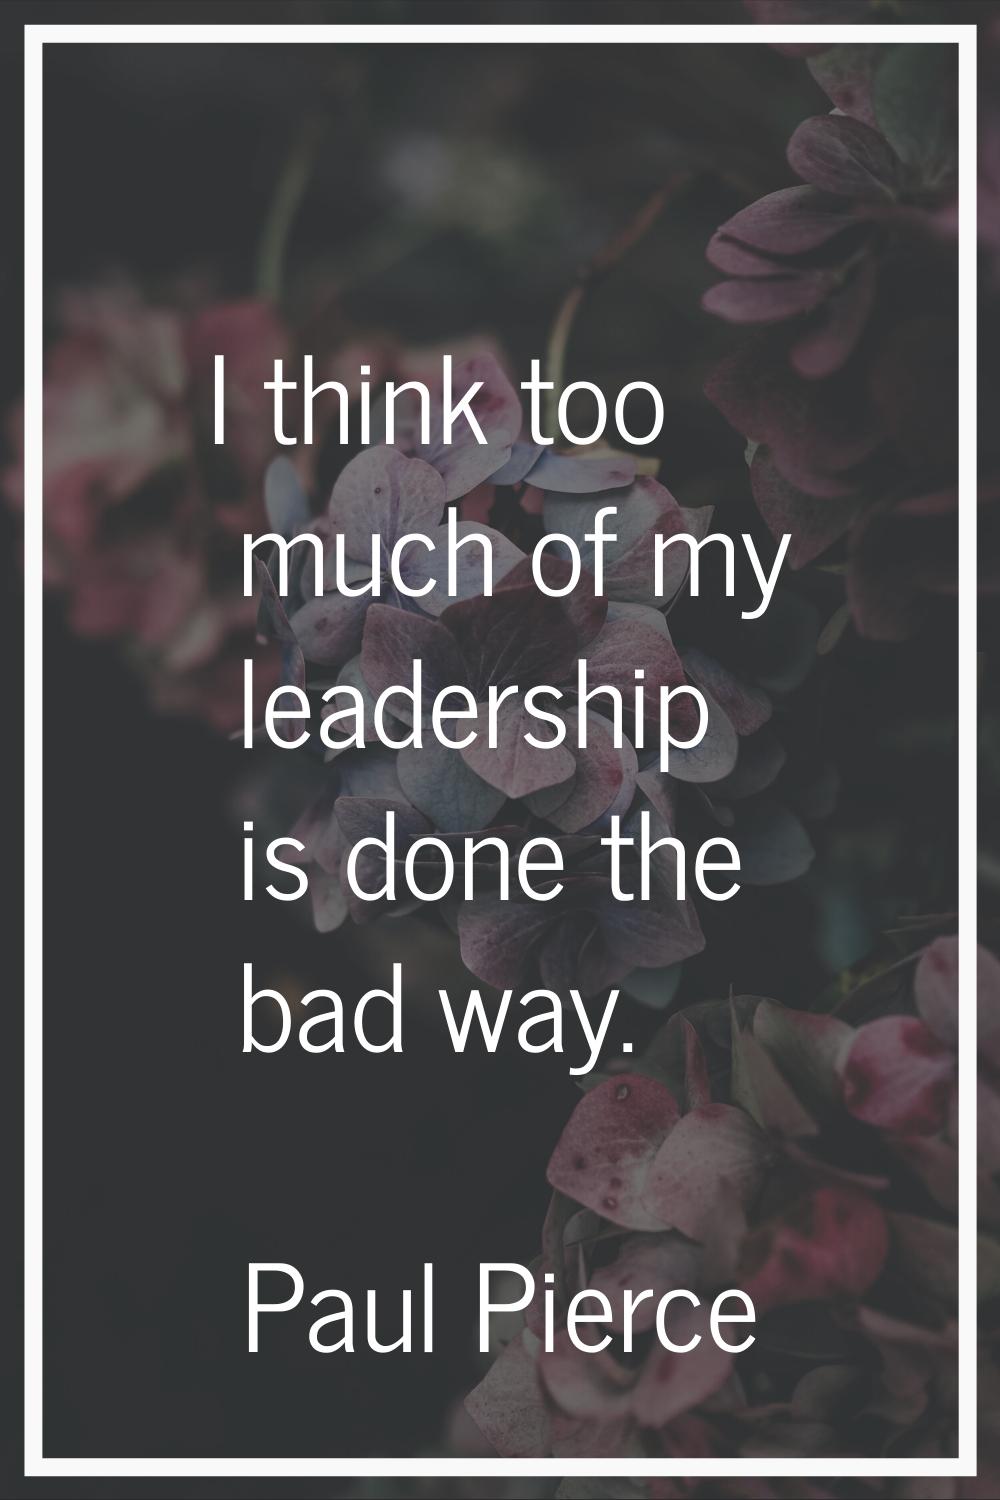 I think too much of my leadership is done the bad way.